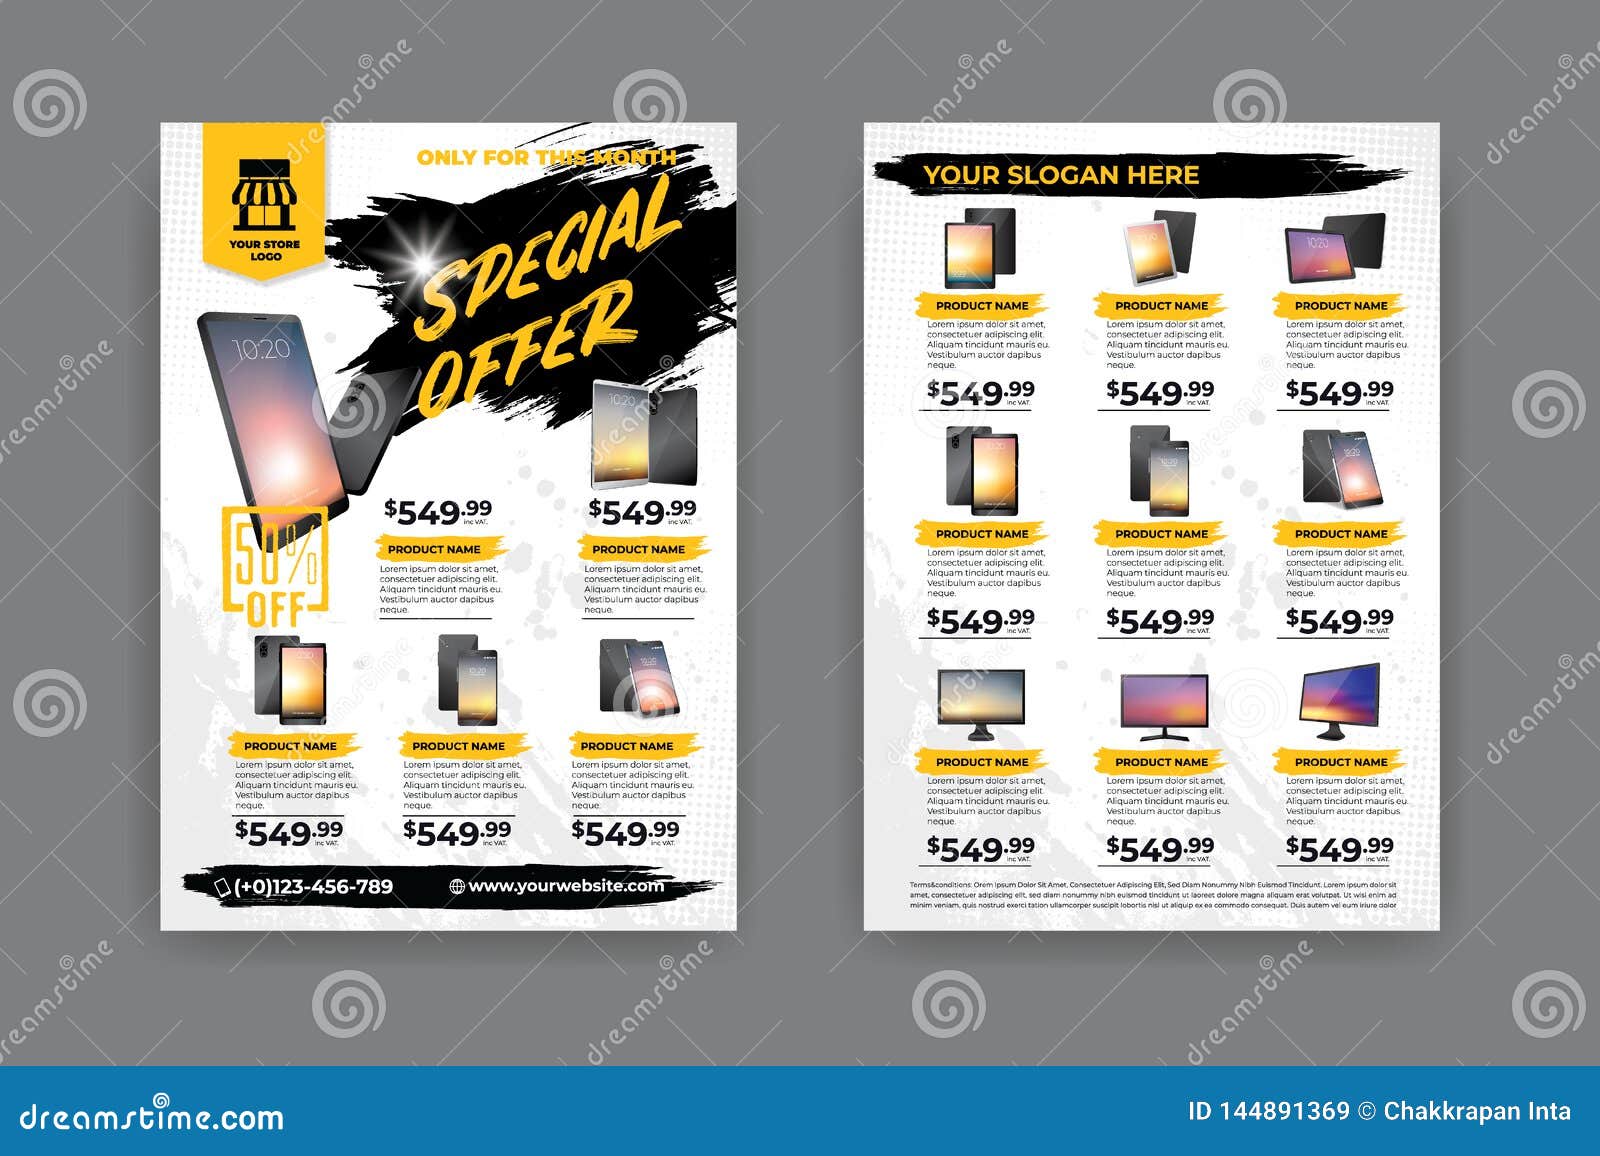 Promo Flyer Template Free from thumbs.dreamstime.com